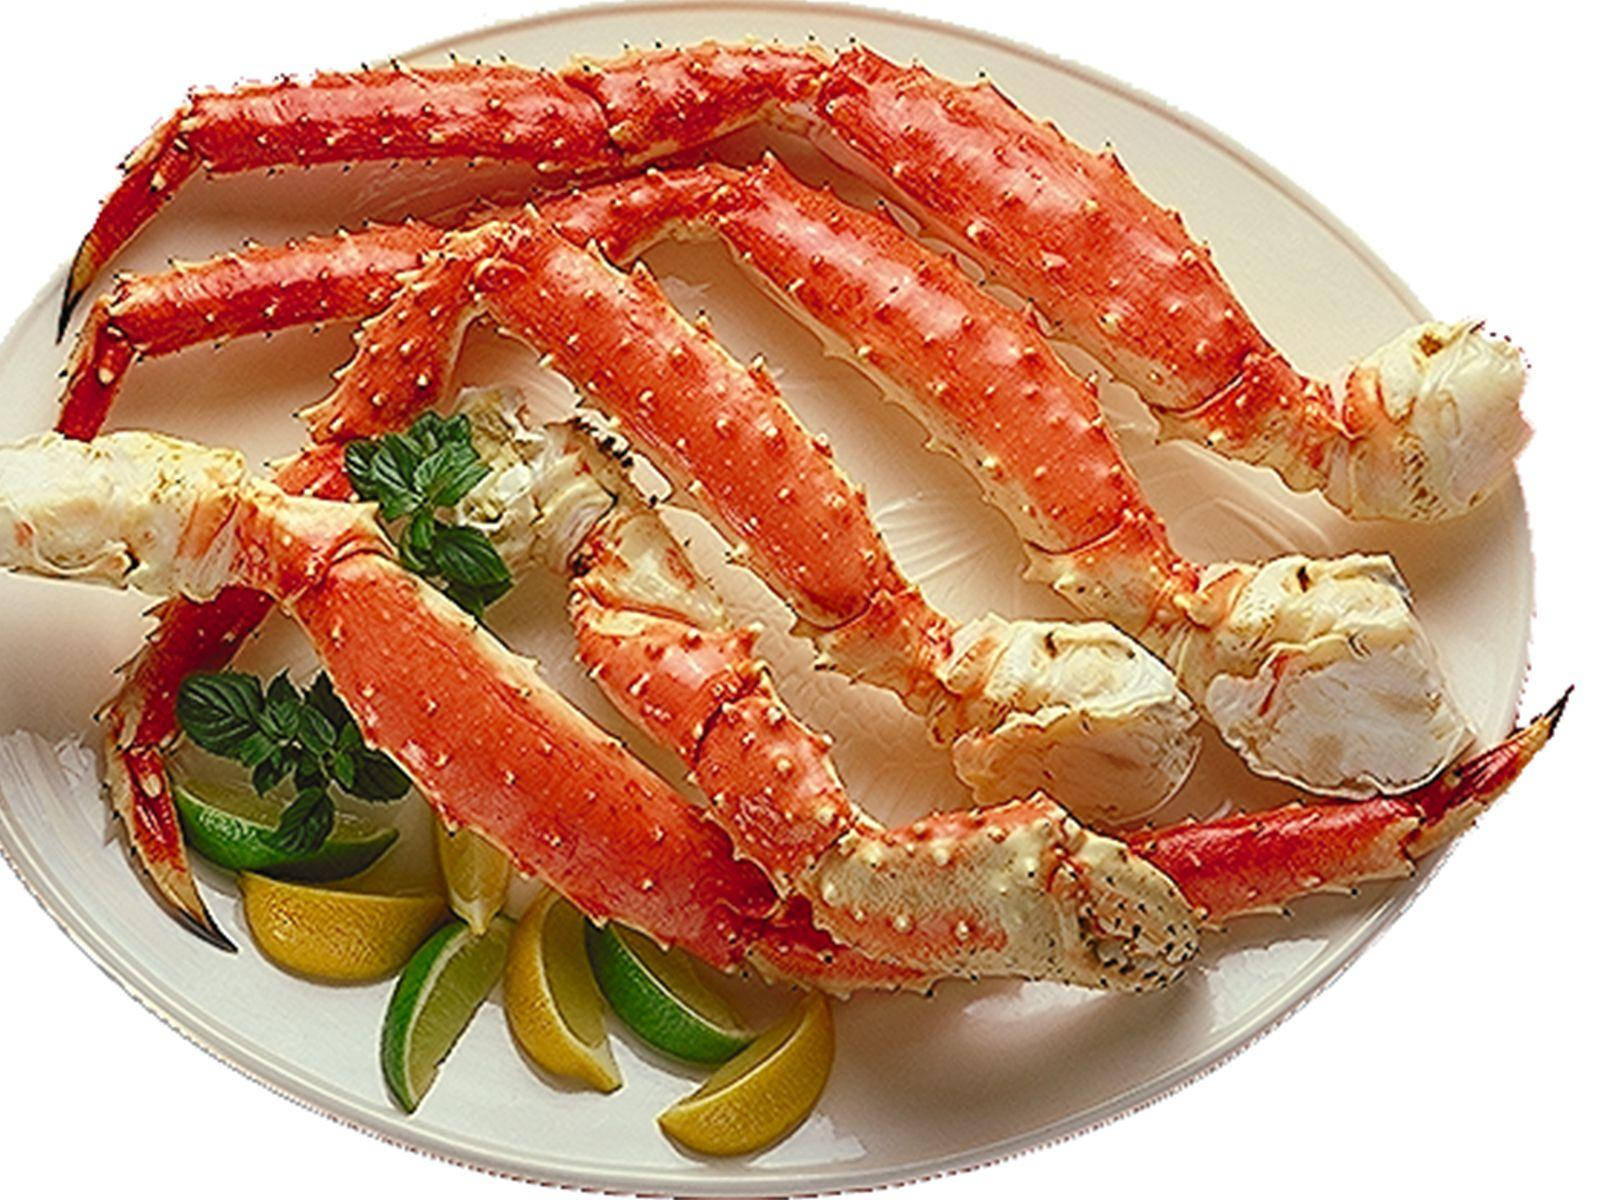 Red King Crab Legs On Plate Wallpaper